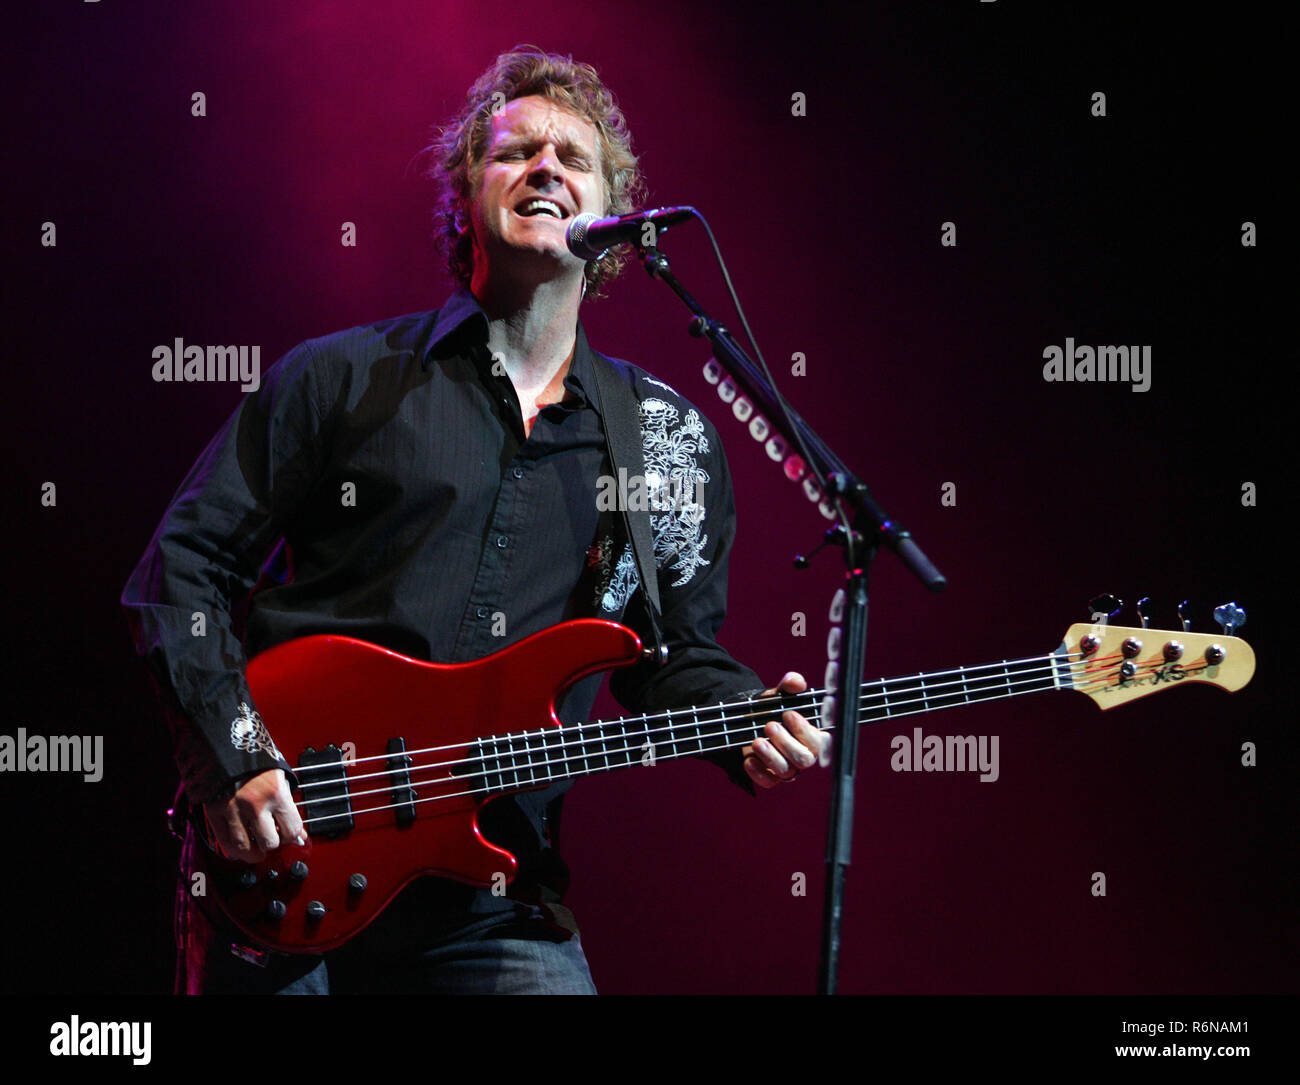 Jason Scheff with Chicago performs in concert at the Seminole Hard Rock Hotel and Casino in Hollywood, Florida on April 7, 2009. Stock Photo